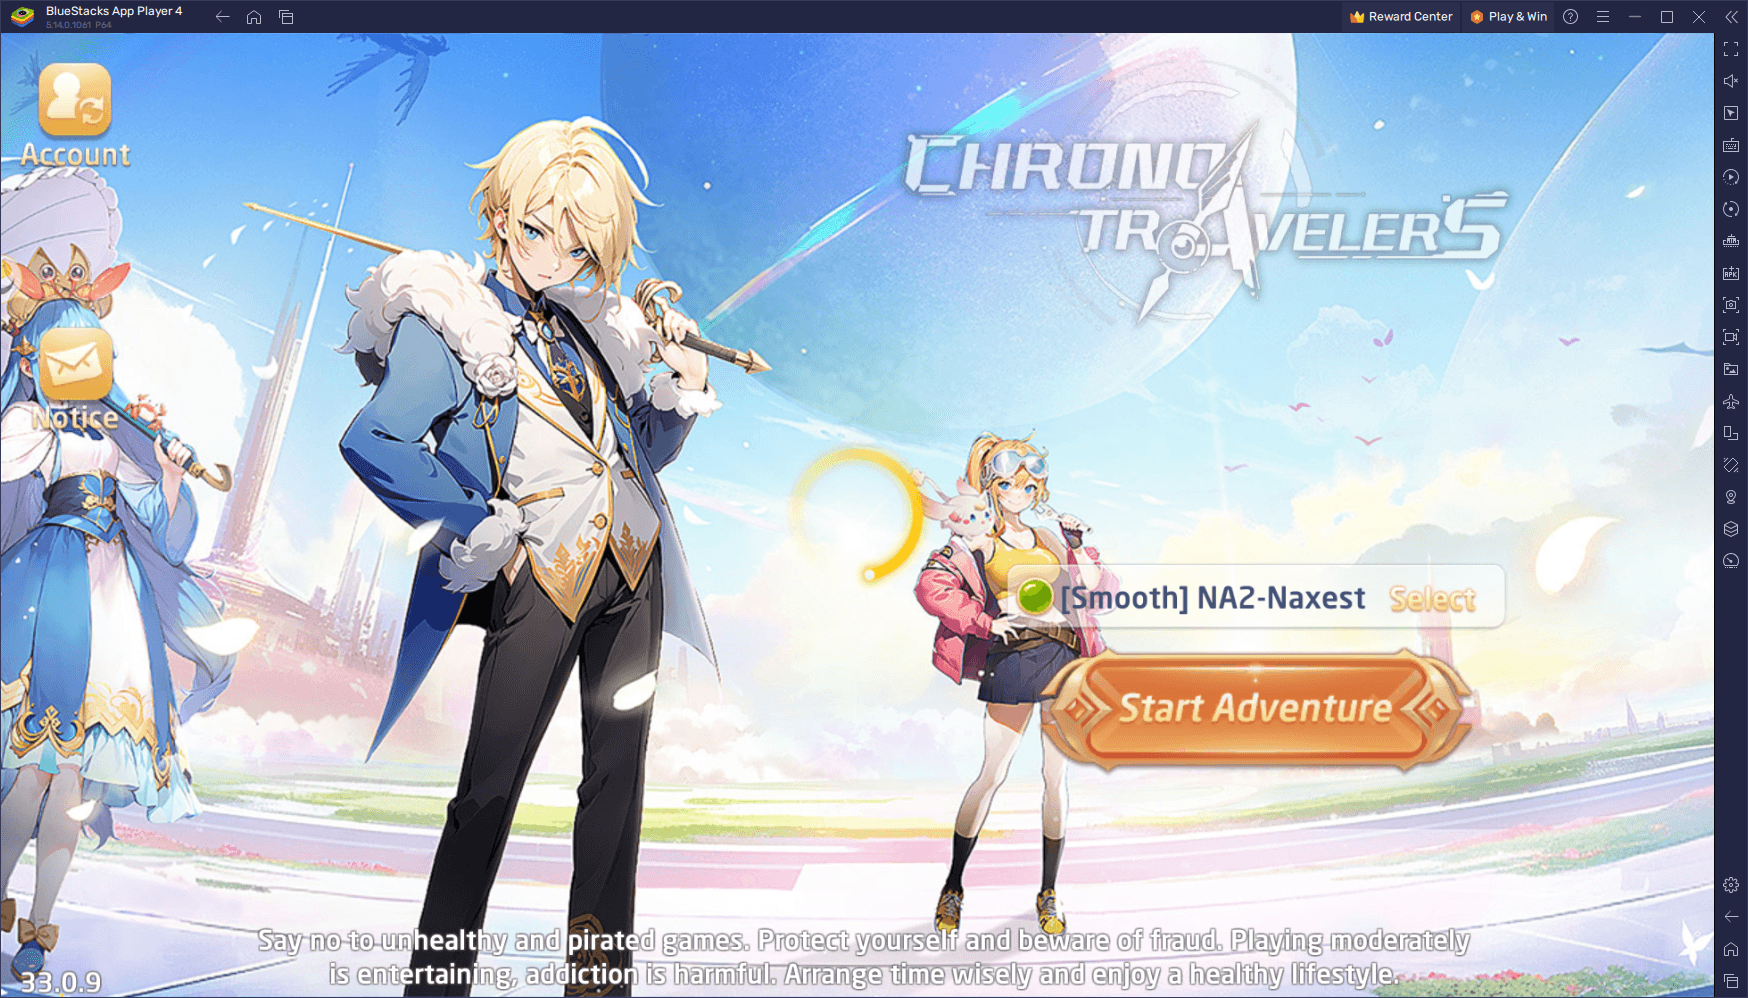 How to Play Chrono Travelers on PC With BlueStacks